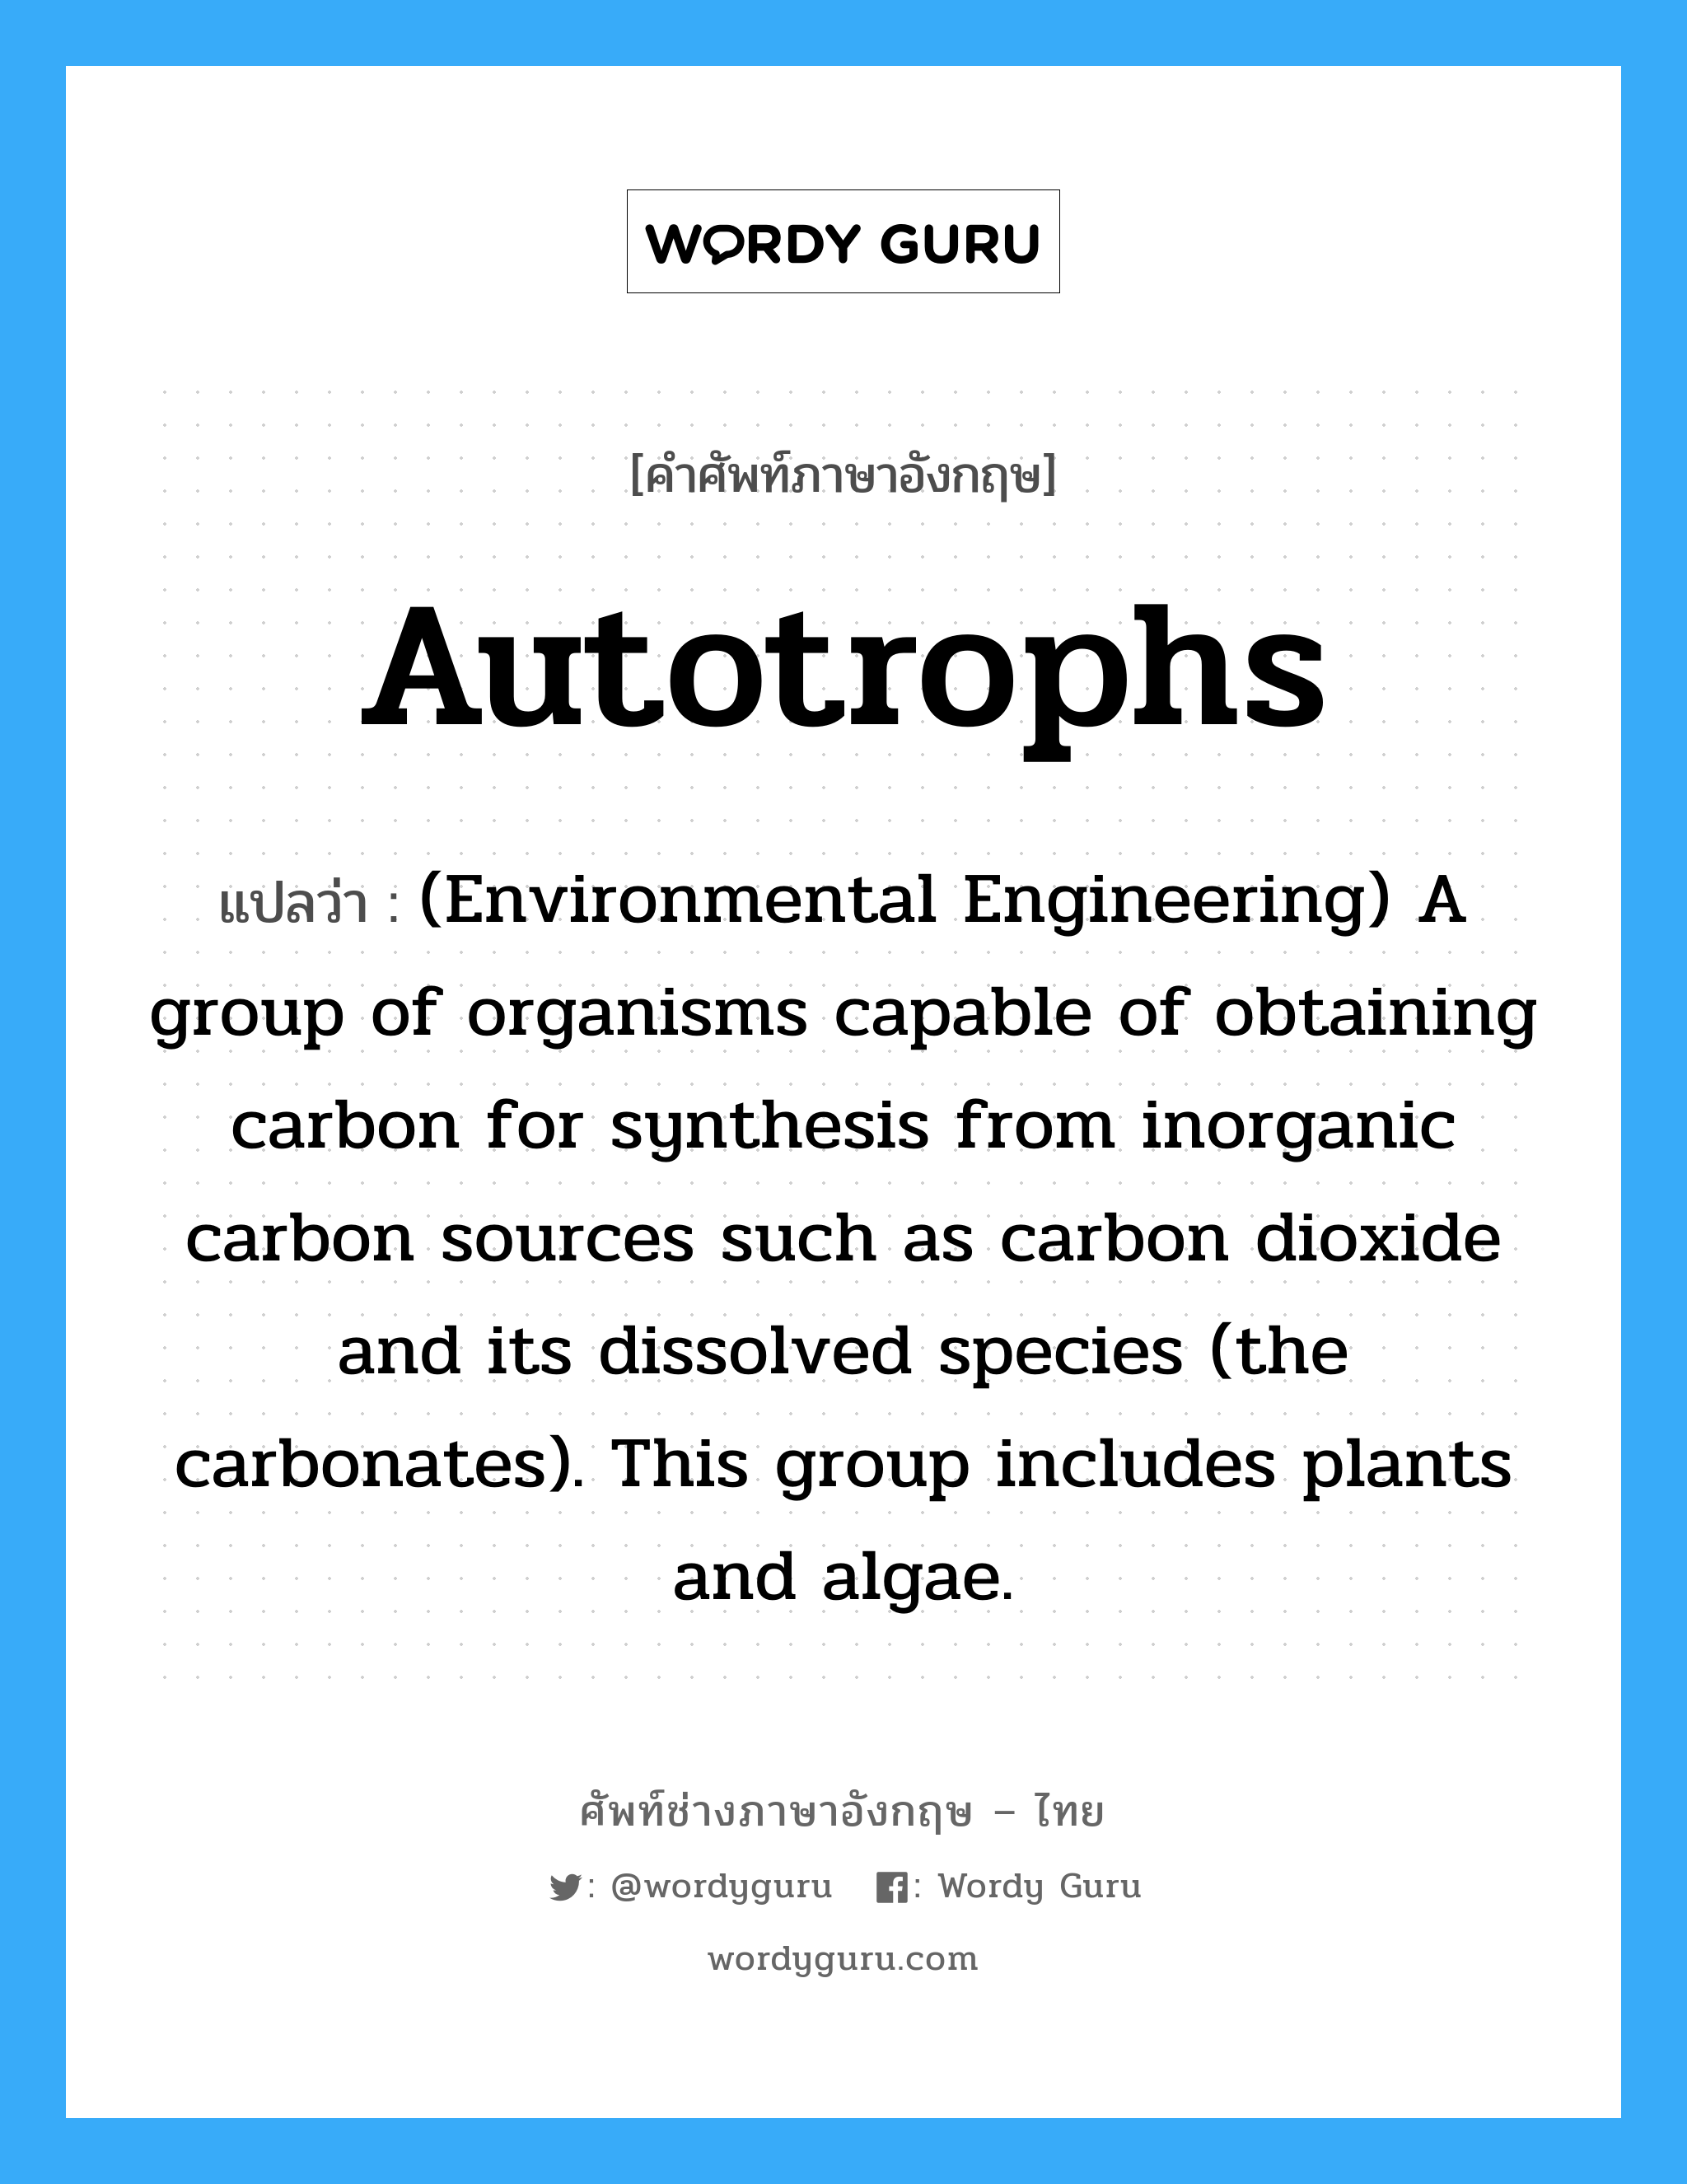 Autotrophs แปลว่า?, คำศัพท์ช่างภาษาอังกฤษ - ไทย Autotrophs คำศัพท์ภาษาอังกฤษ Autotrophs แปลว่า (Environmental Engineering) A group of organisms capable of obtaining carbon for synthesis from inorganic carbon sources such as carbon dioxide and its dissolved species (the carbonates). This group includes plants and algae.